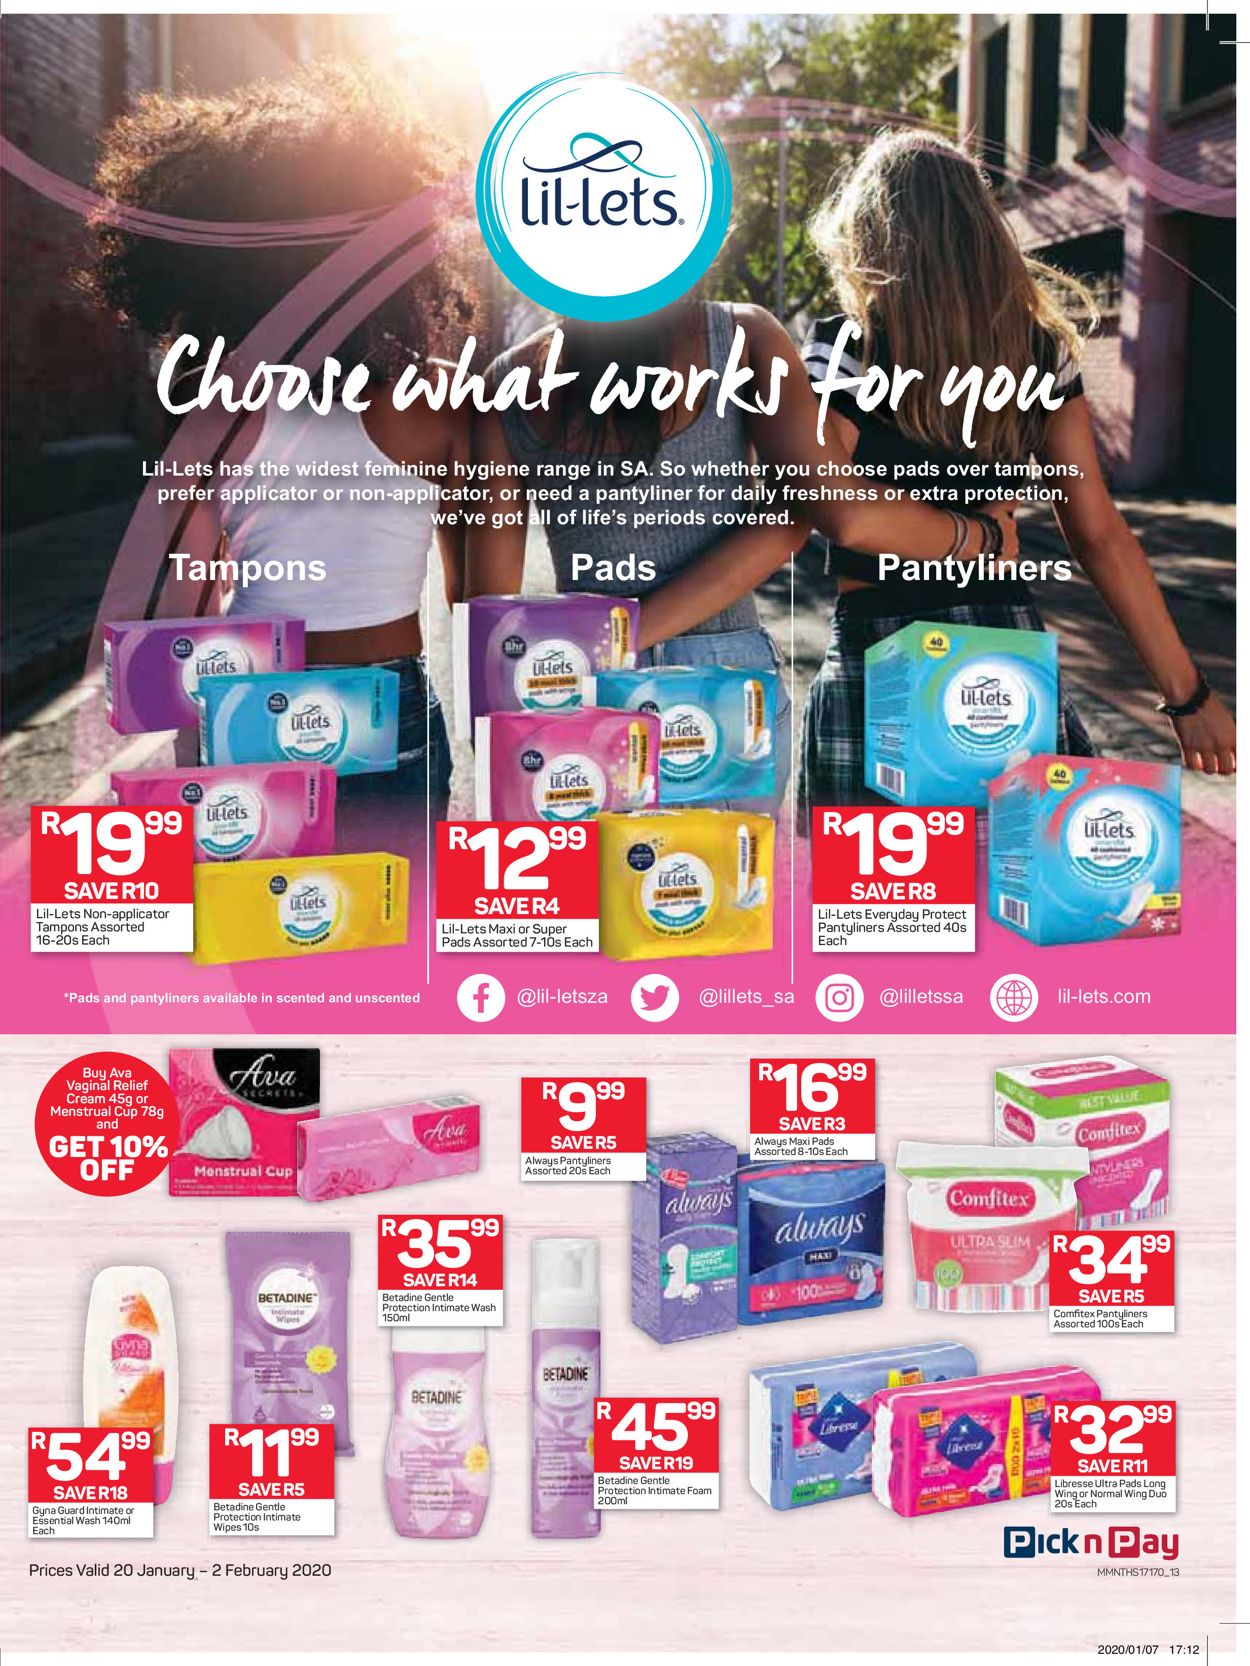 Pick n Pay Catalogue - 2020/01/20-2020/02/02 (Page 14)